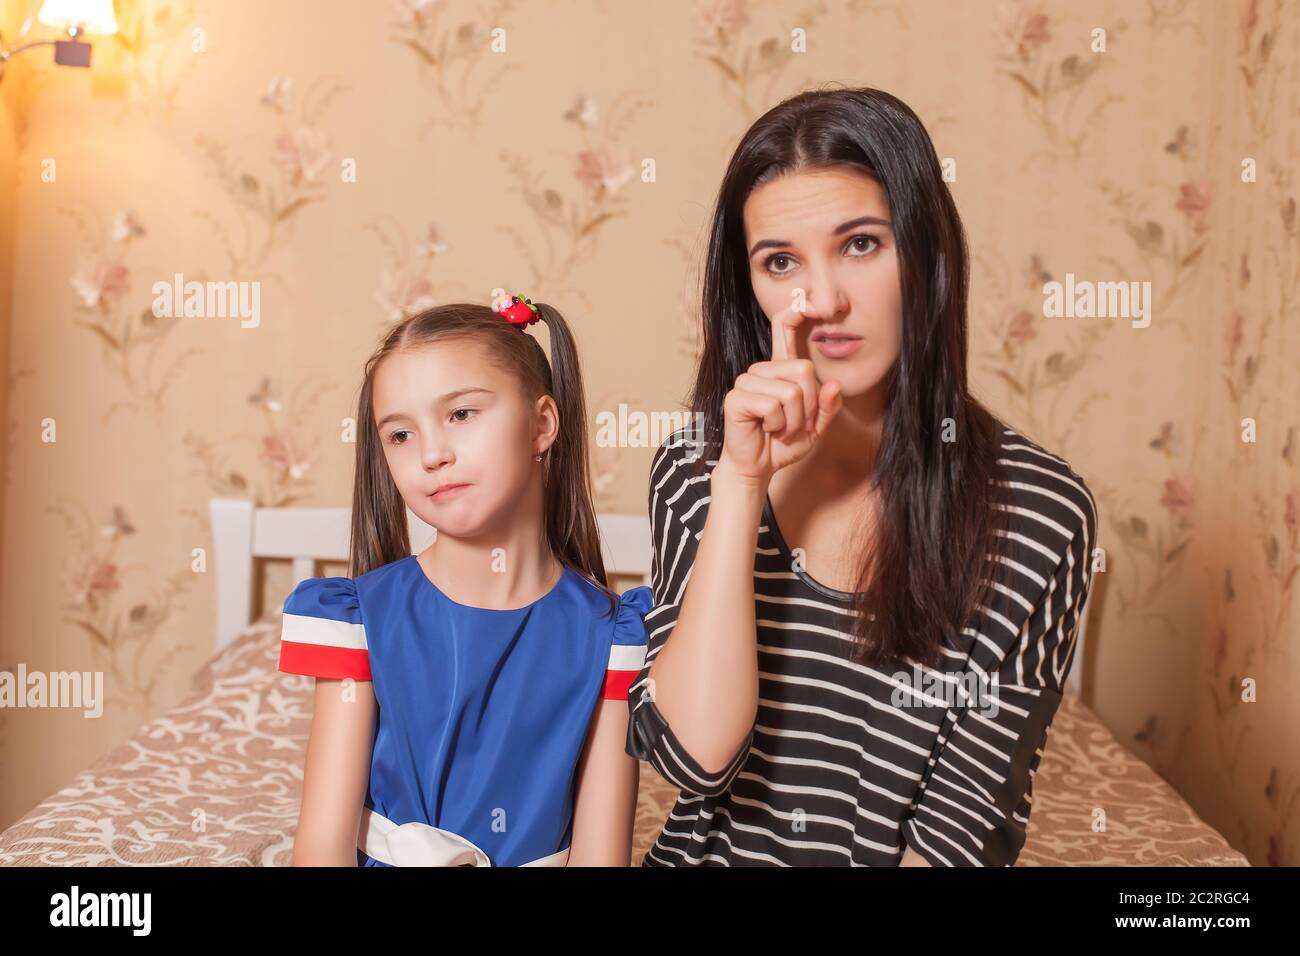 Mother picking a nose against her pretty daughter. Stock Photo